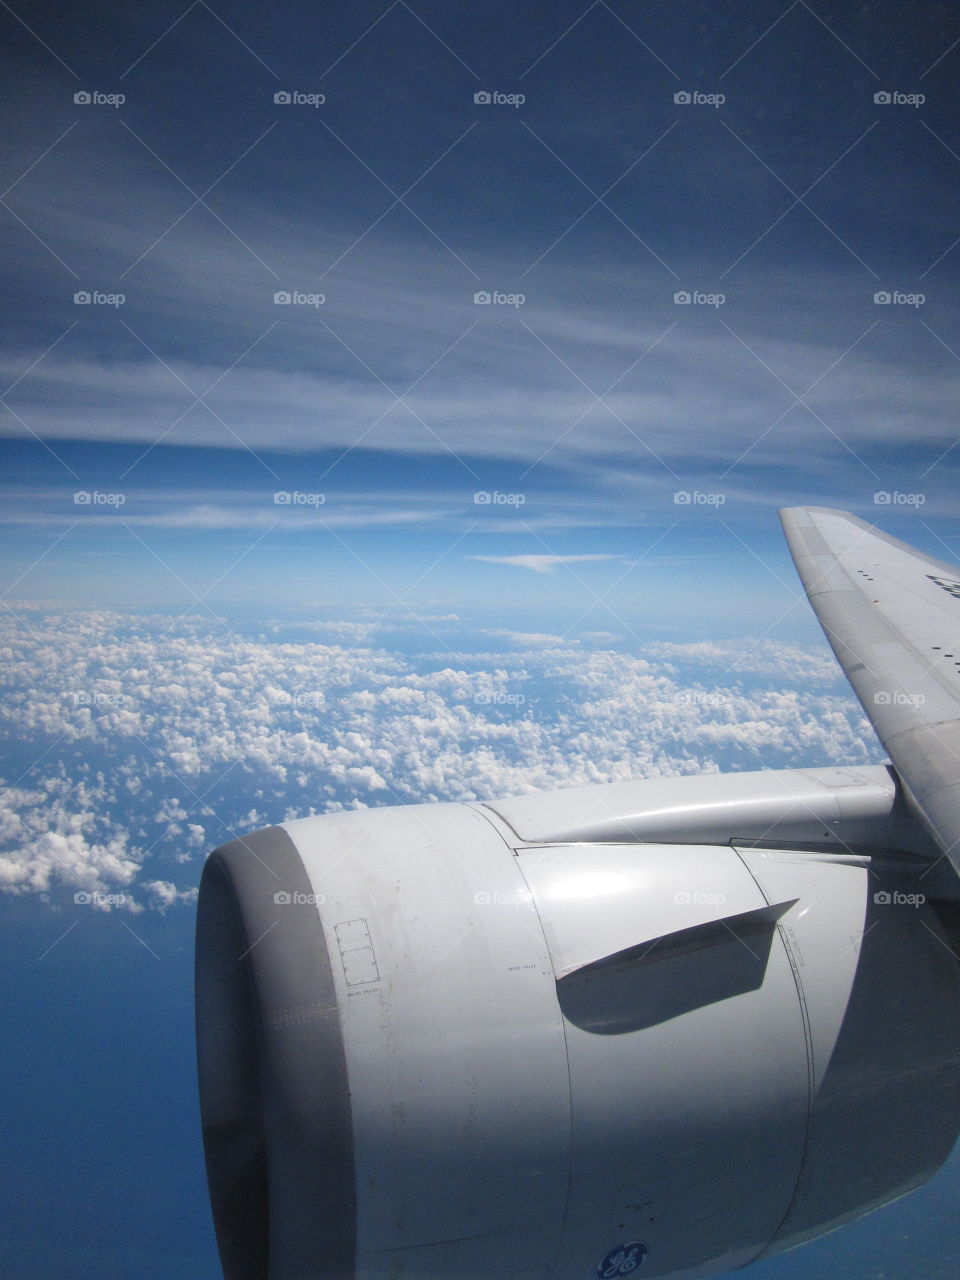 Above the sky. I happened to get a window seat and saw this beautiful cloudscape!